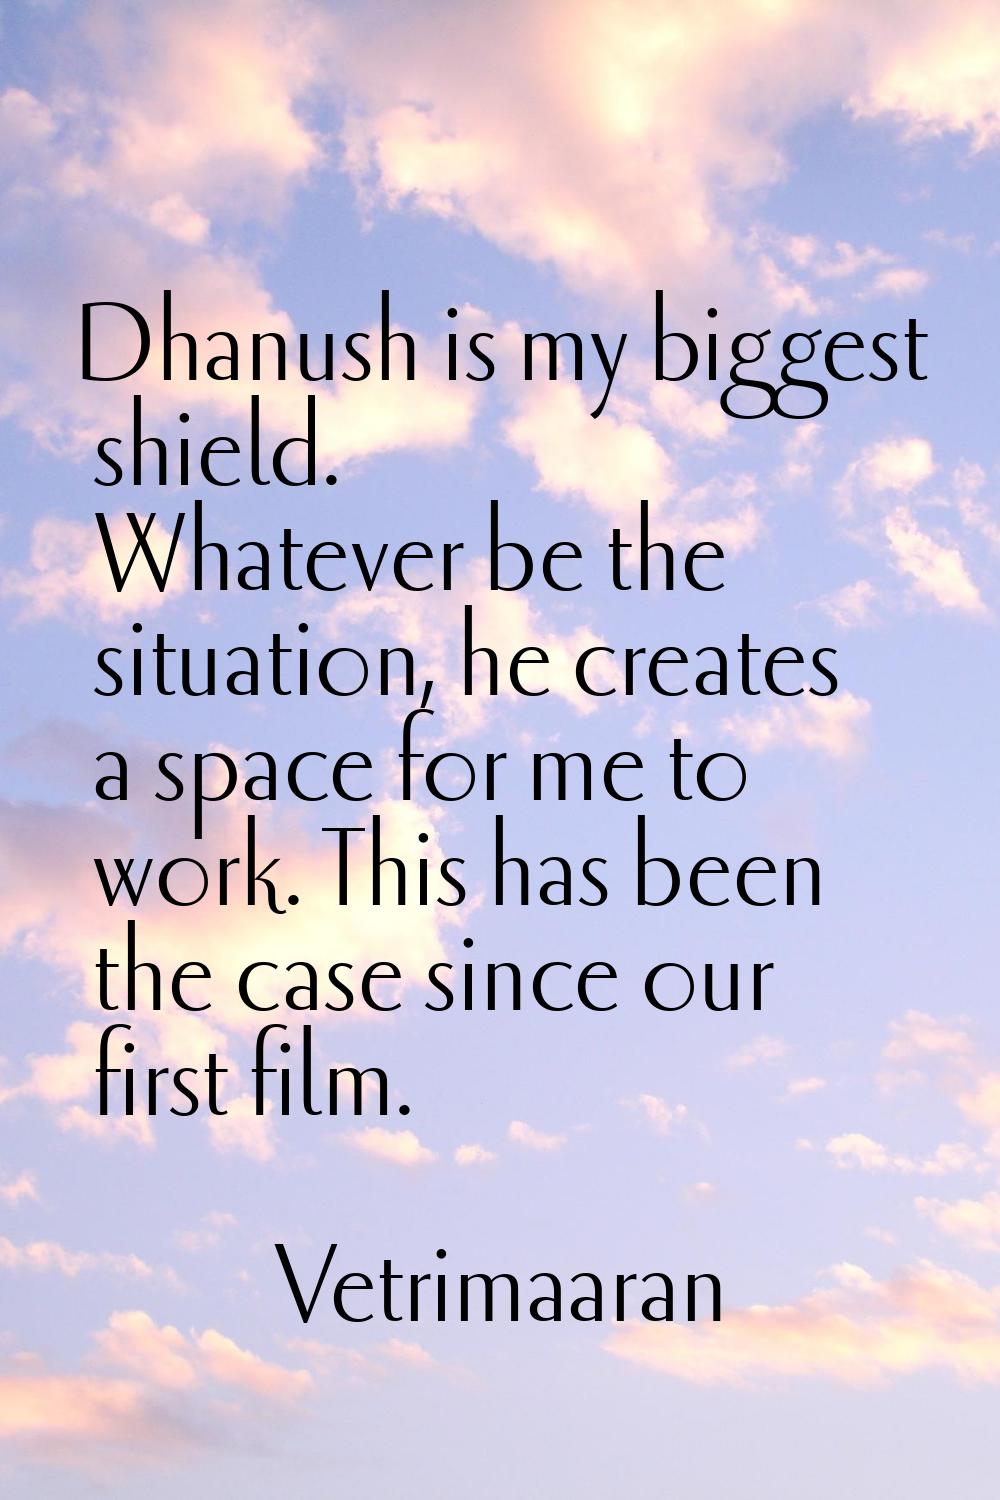 Dhanush is my biggest shield. Whatever be the situation, he creates a space for me to work. This ha